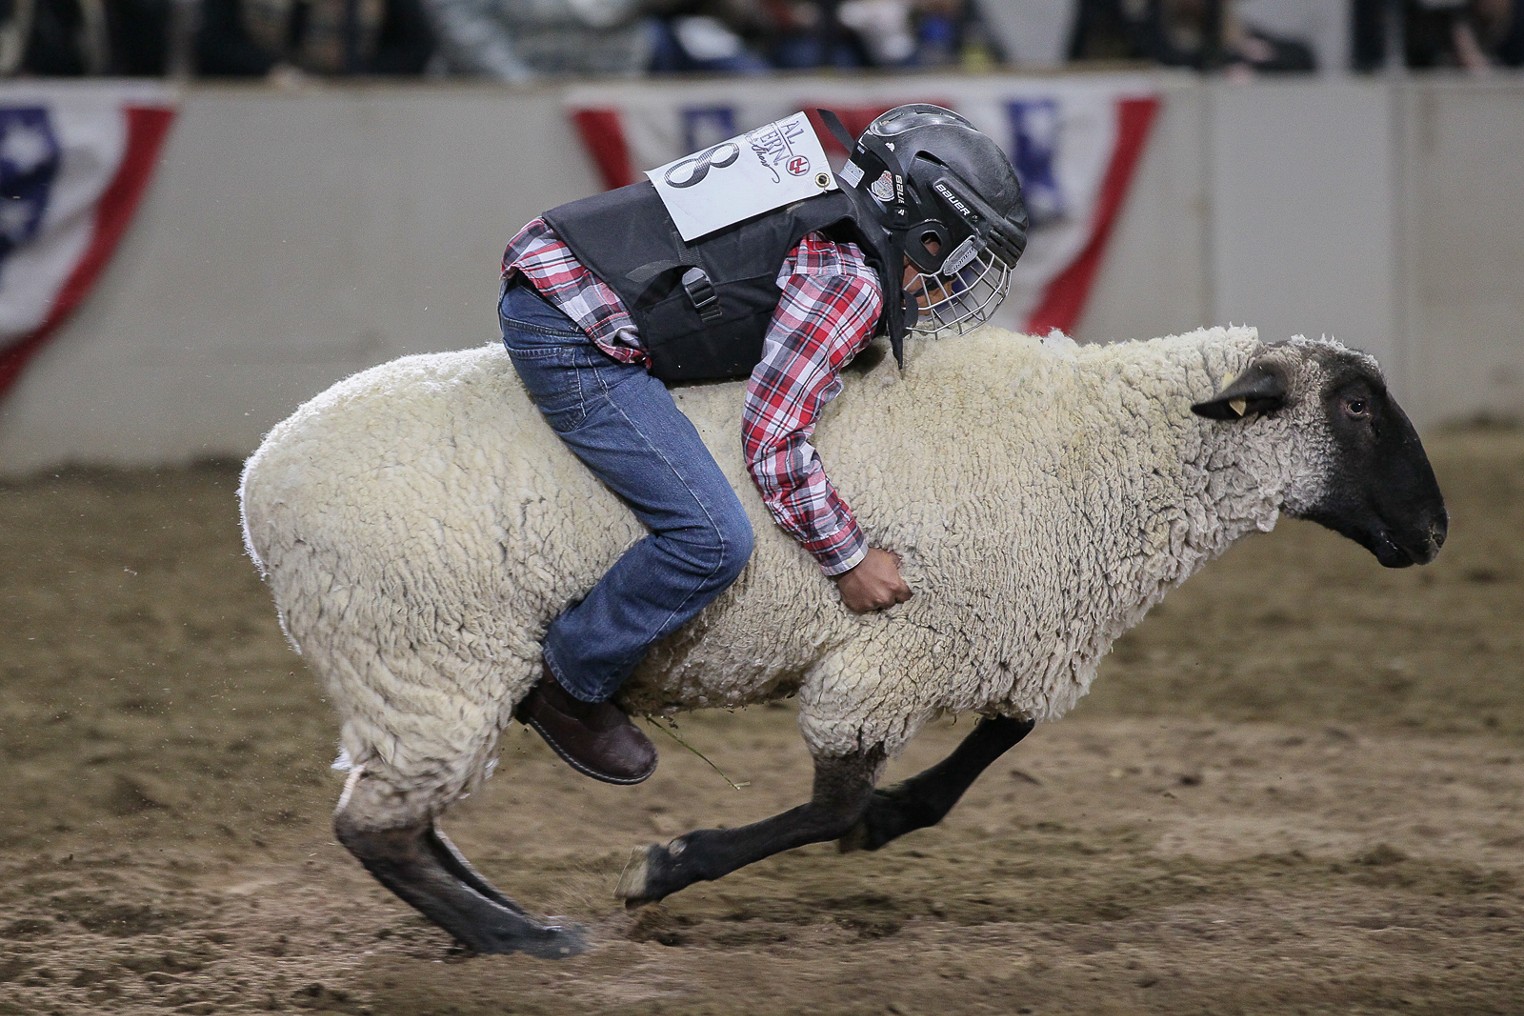 Mutton Bustin' Everyone's Favorite Event at the National Western Stock